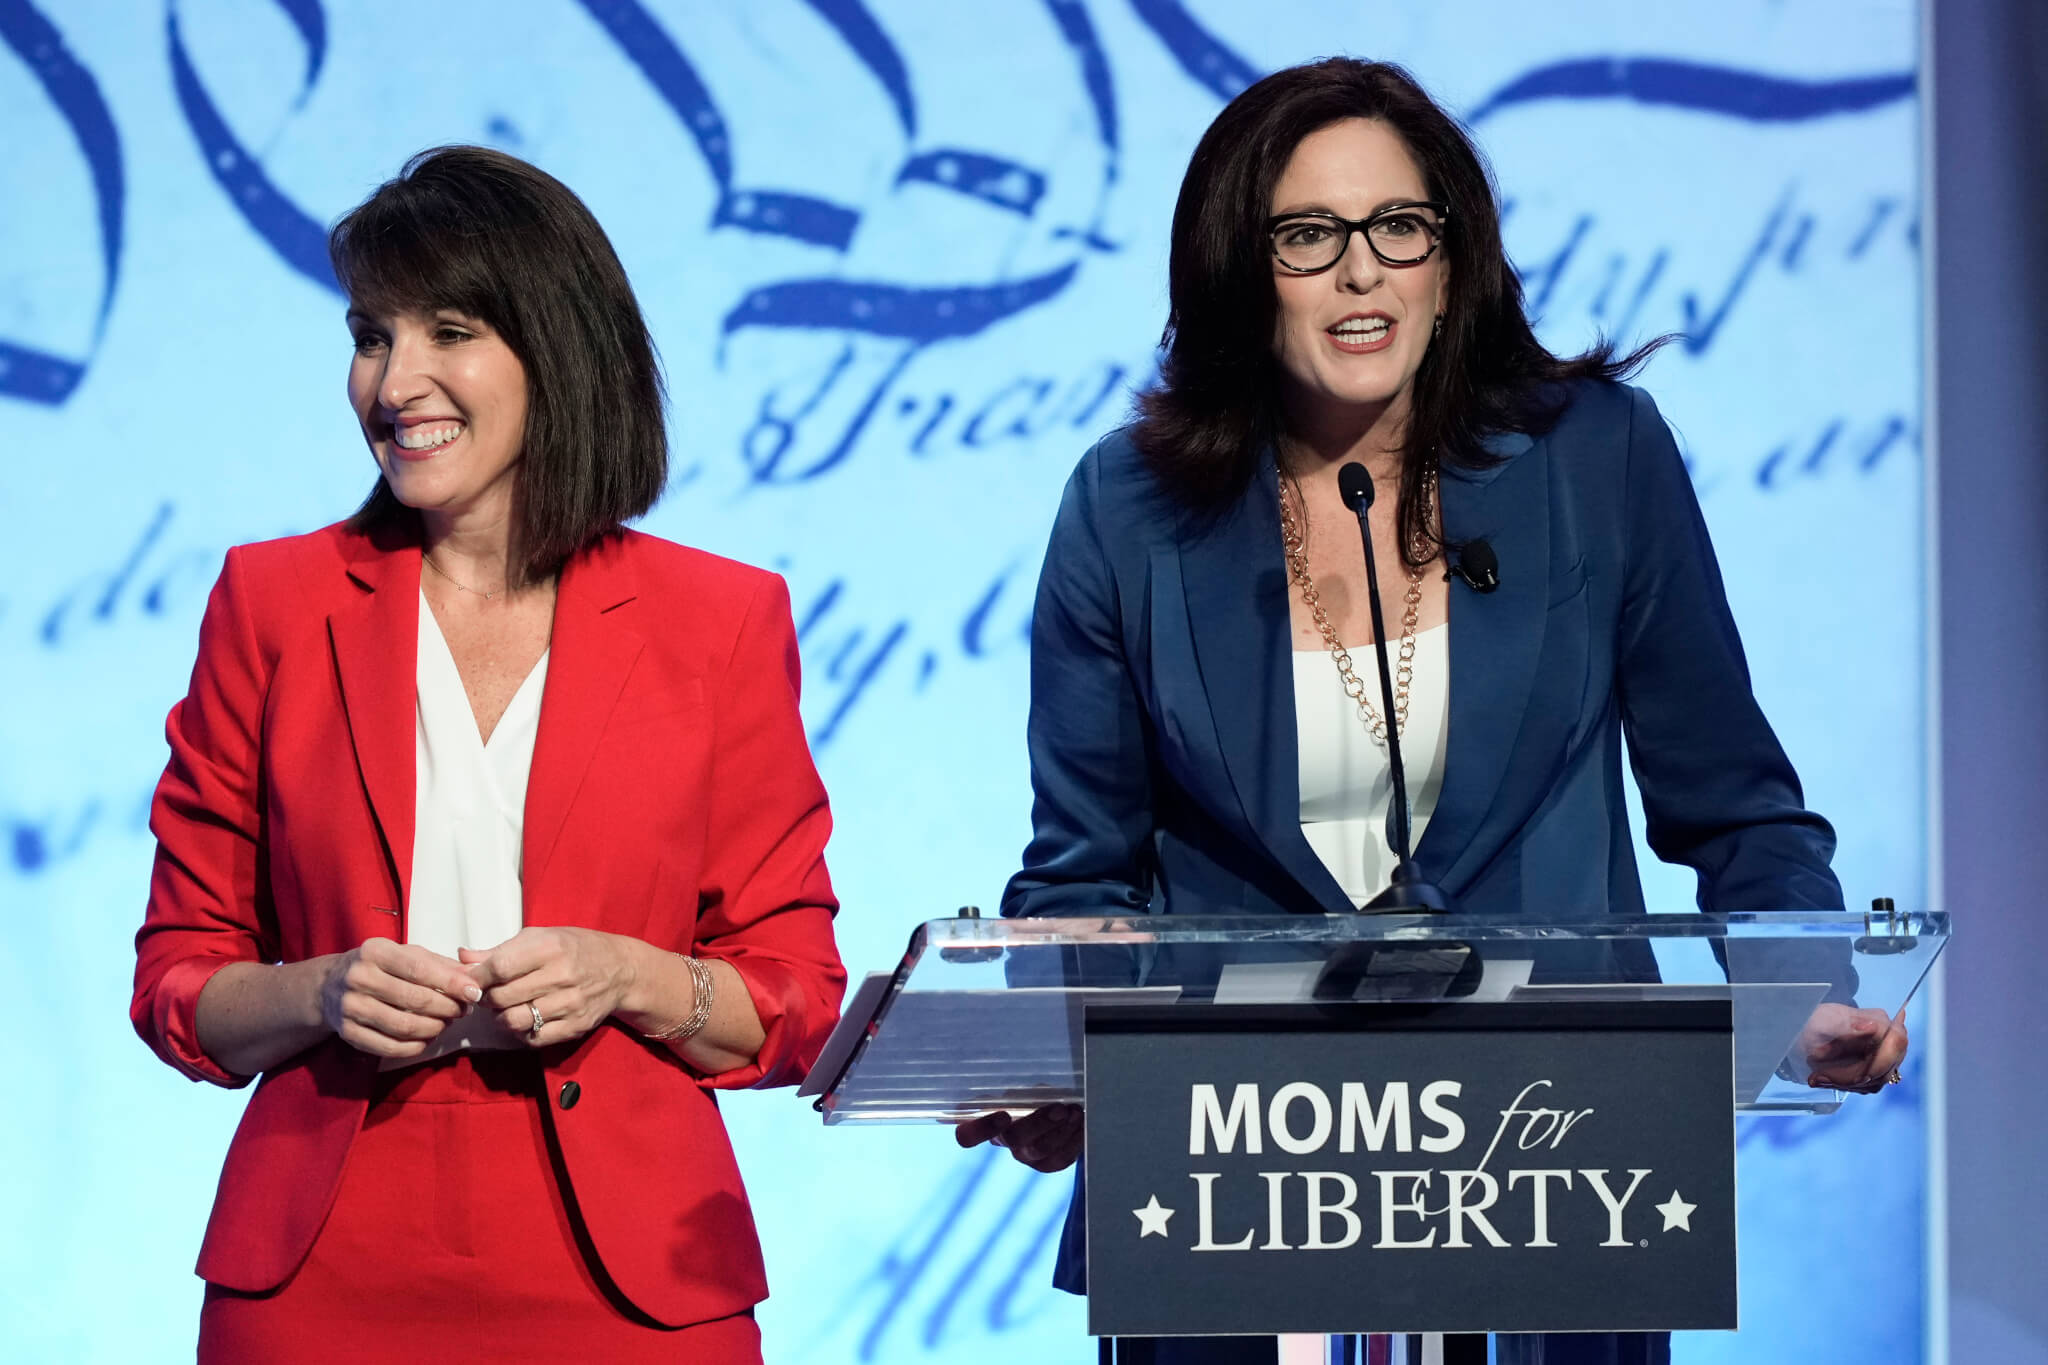 Moms for Liberty co-founders Tina Descovich, left, and Tiffany Justice, speak at the Moms for Liberty meeting in Philadelphia, Friday, June 30, 2023. (AP Photo/Matt Rourke, File)